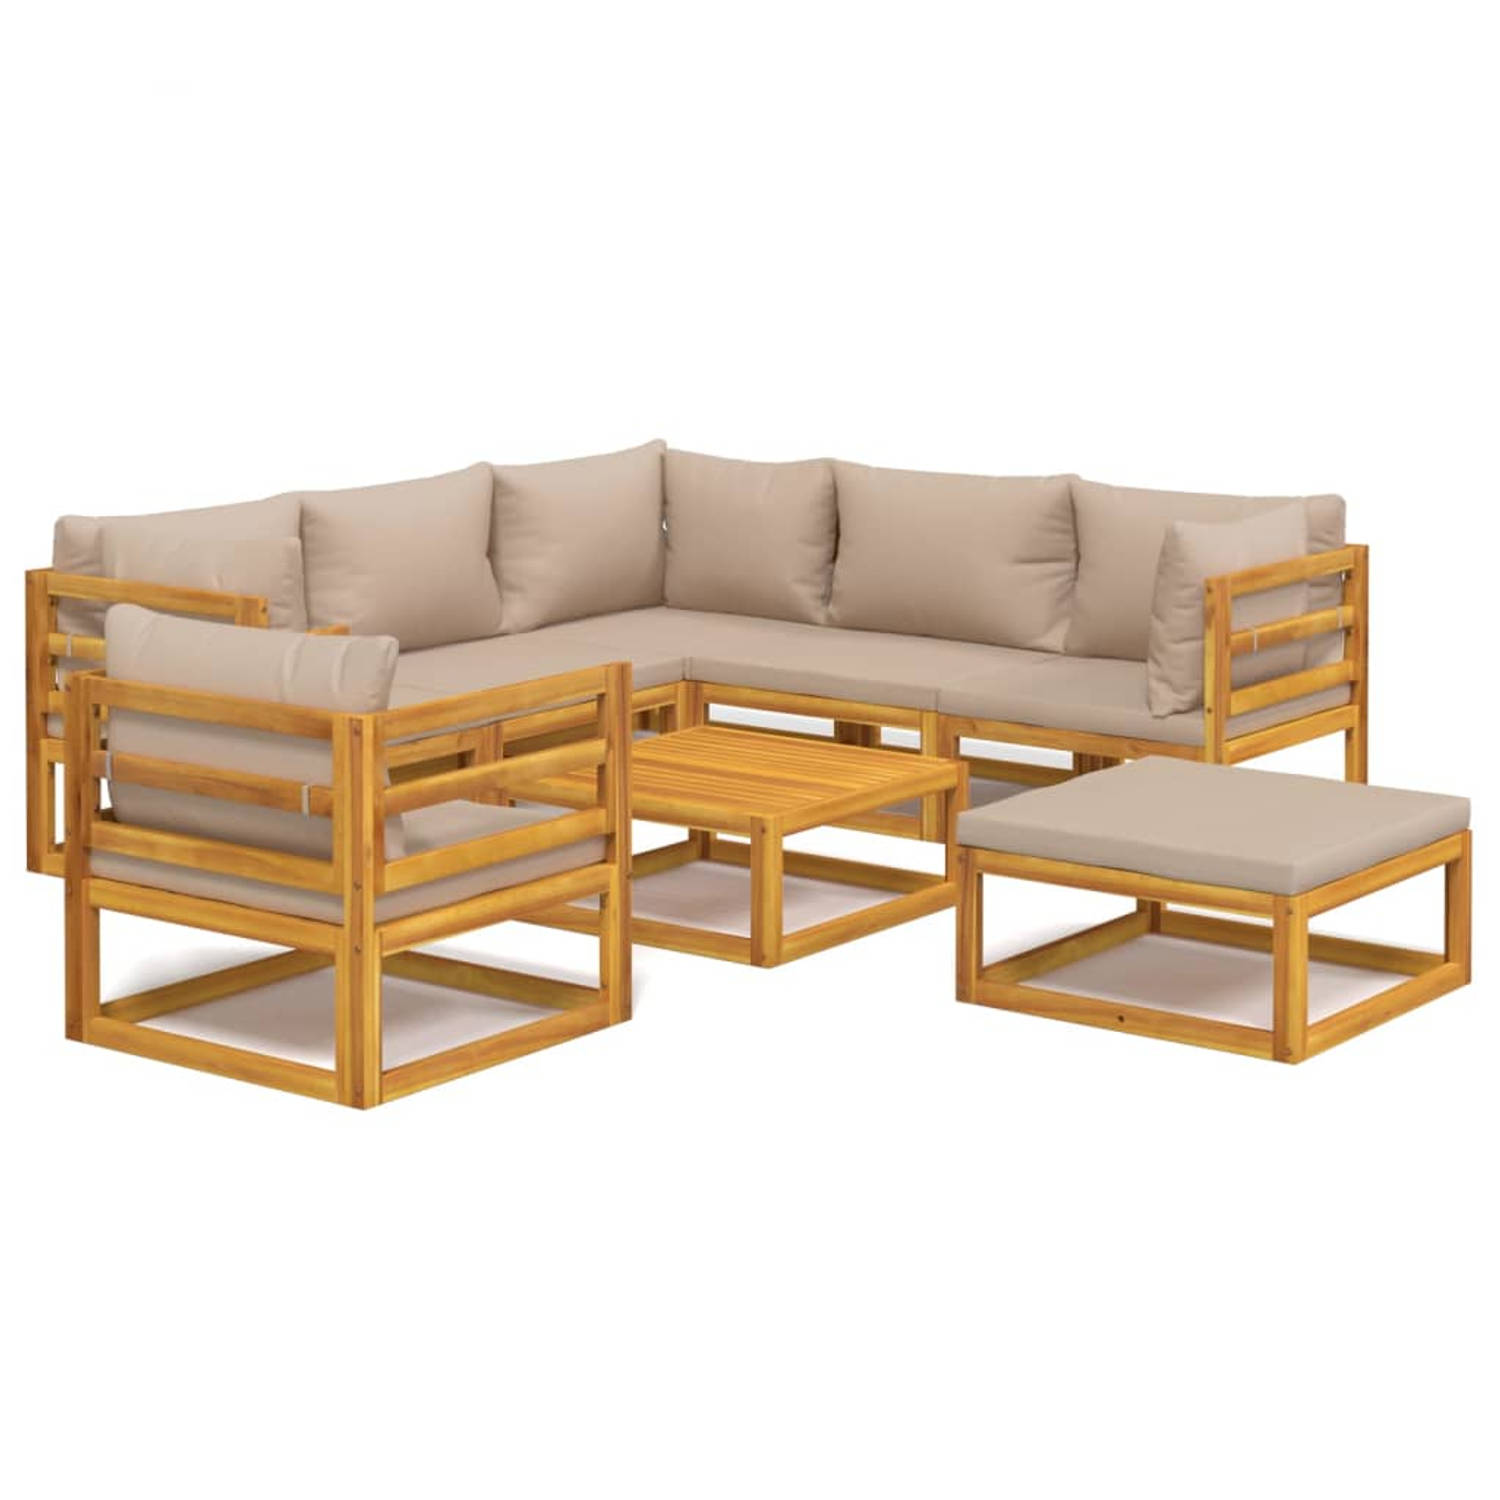 The Living Store 8-delige Loungeset met kussens massief hout taupe - Tuinset